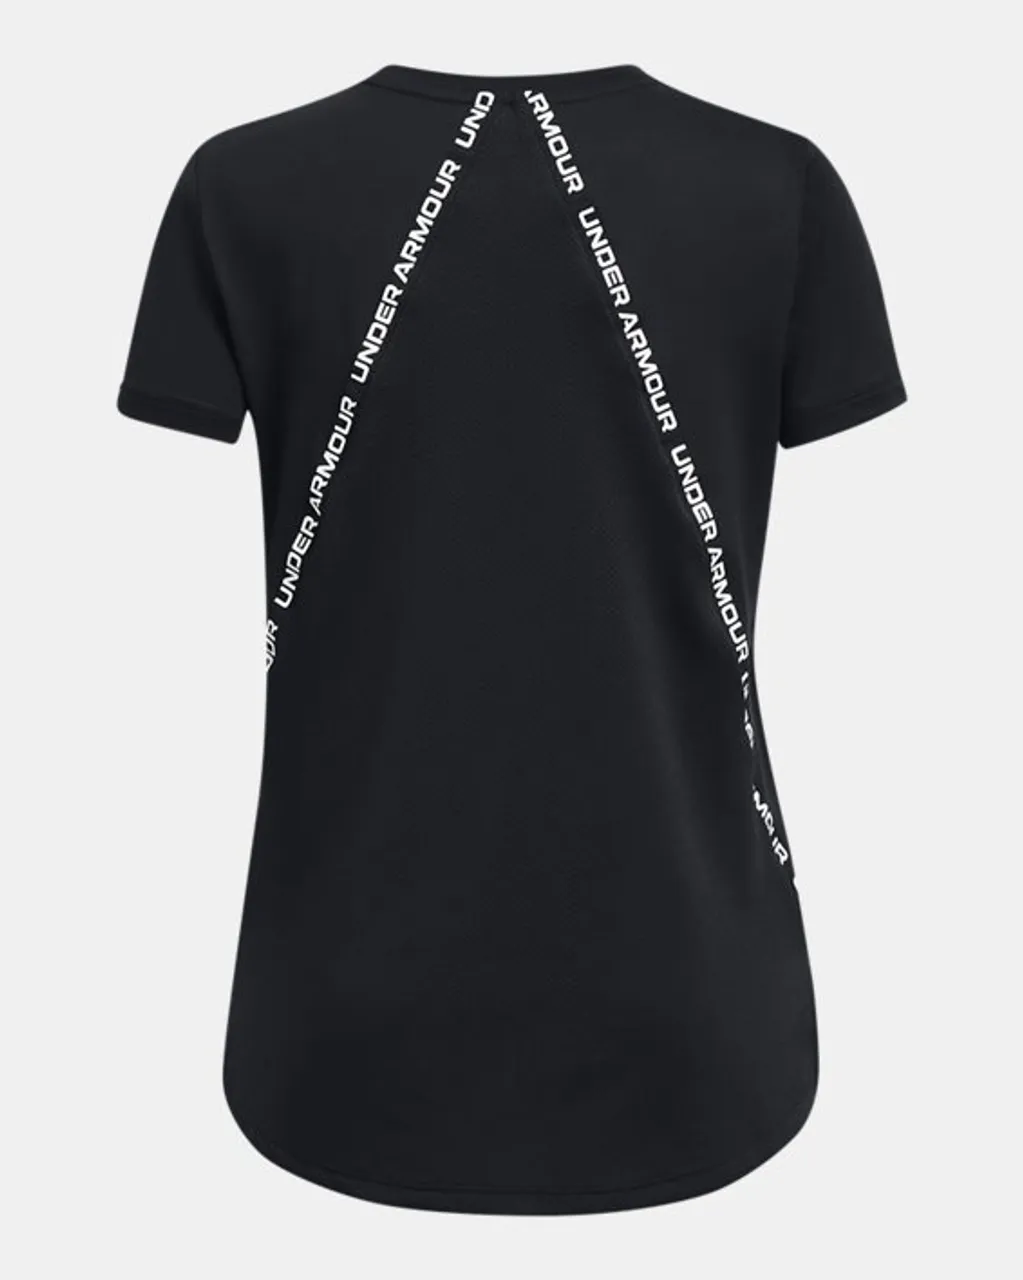 Girls'  Under Armour  Knockout T-Shirt Black / White YLG (59 - 63 in)